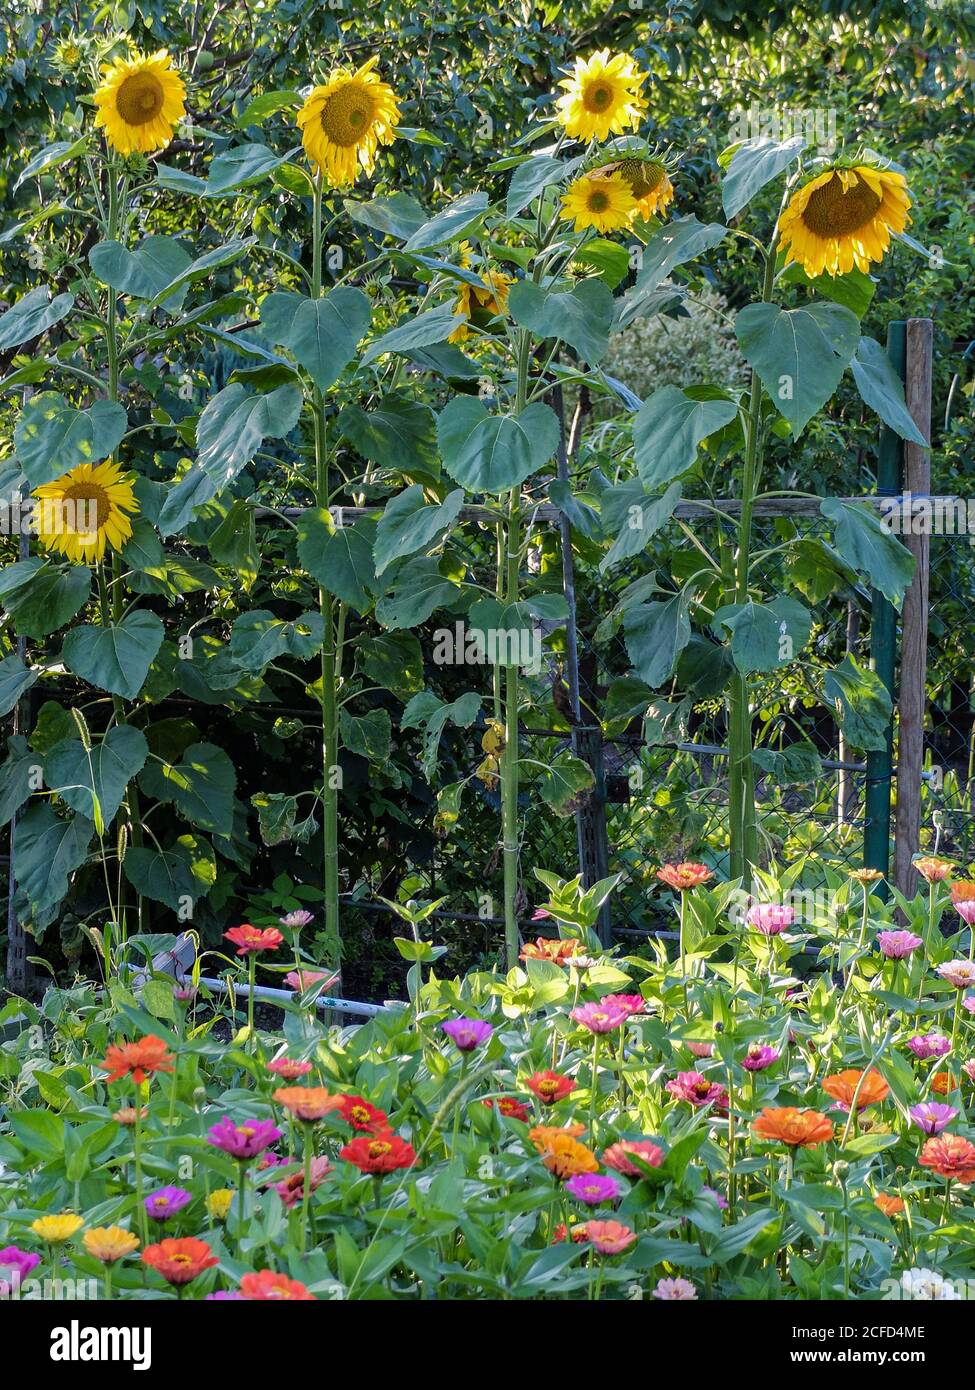 Sunflowers (Helianthus annuus) grow in the row as a screen Stock Photo